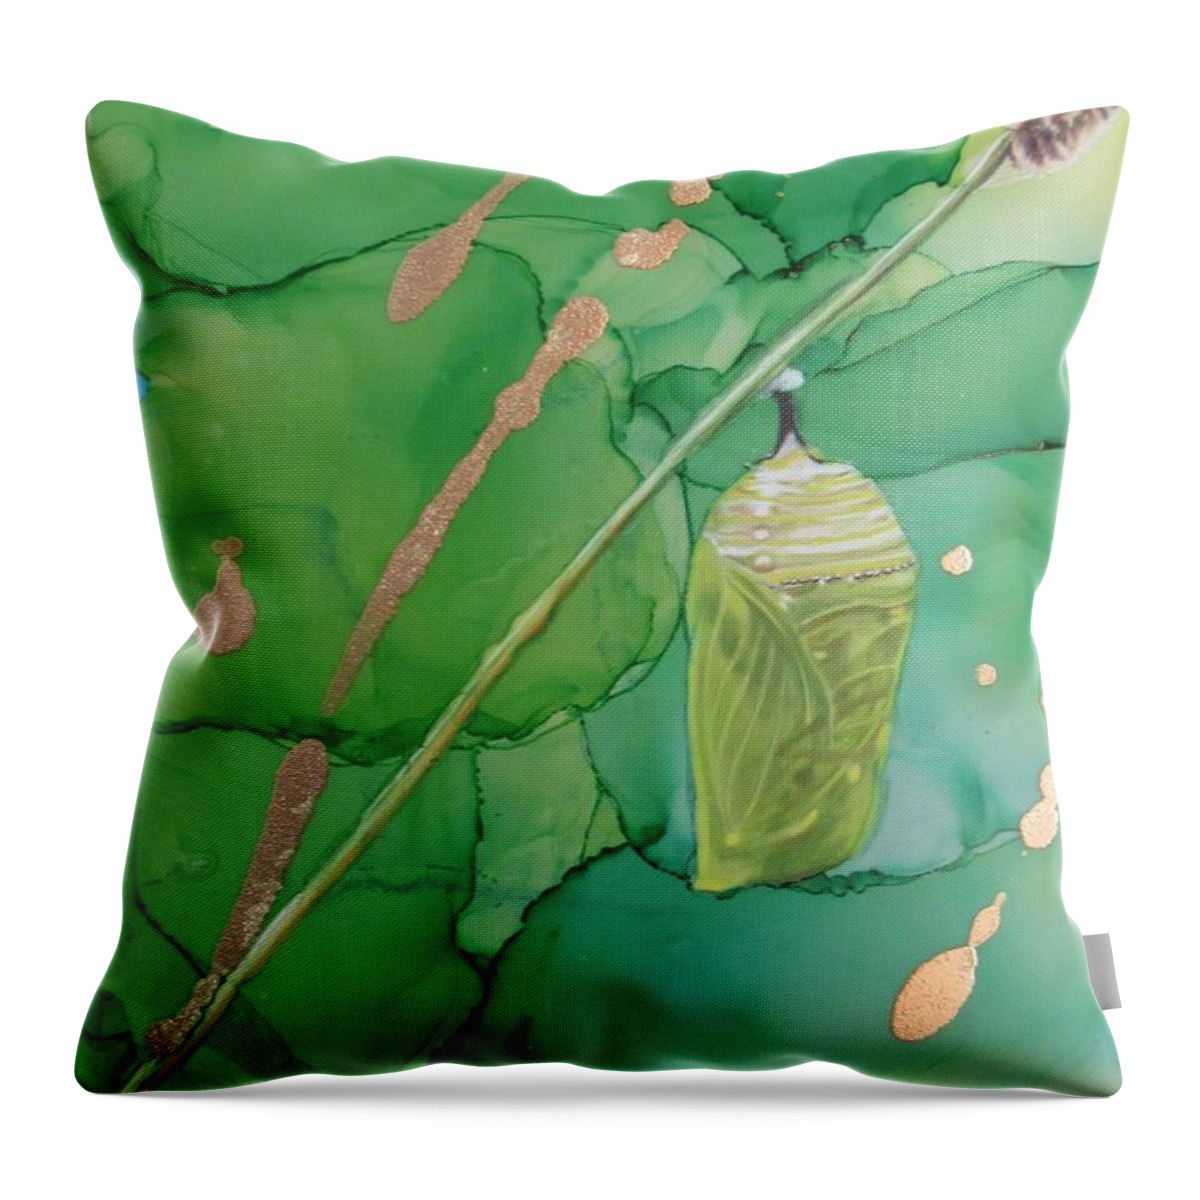  Throw Pillow featuring the drawing Chrysalis by Kelly Speros